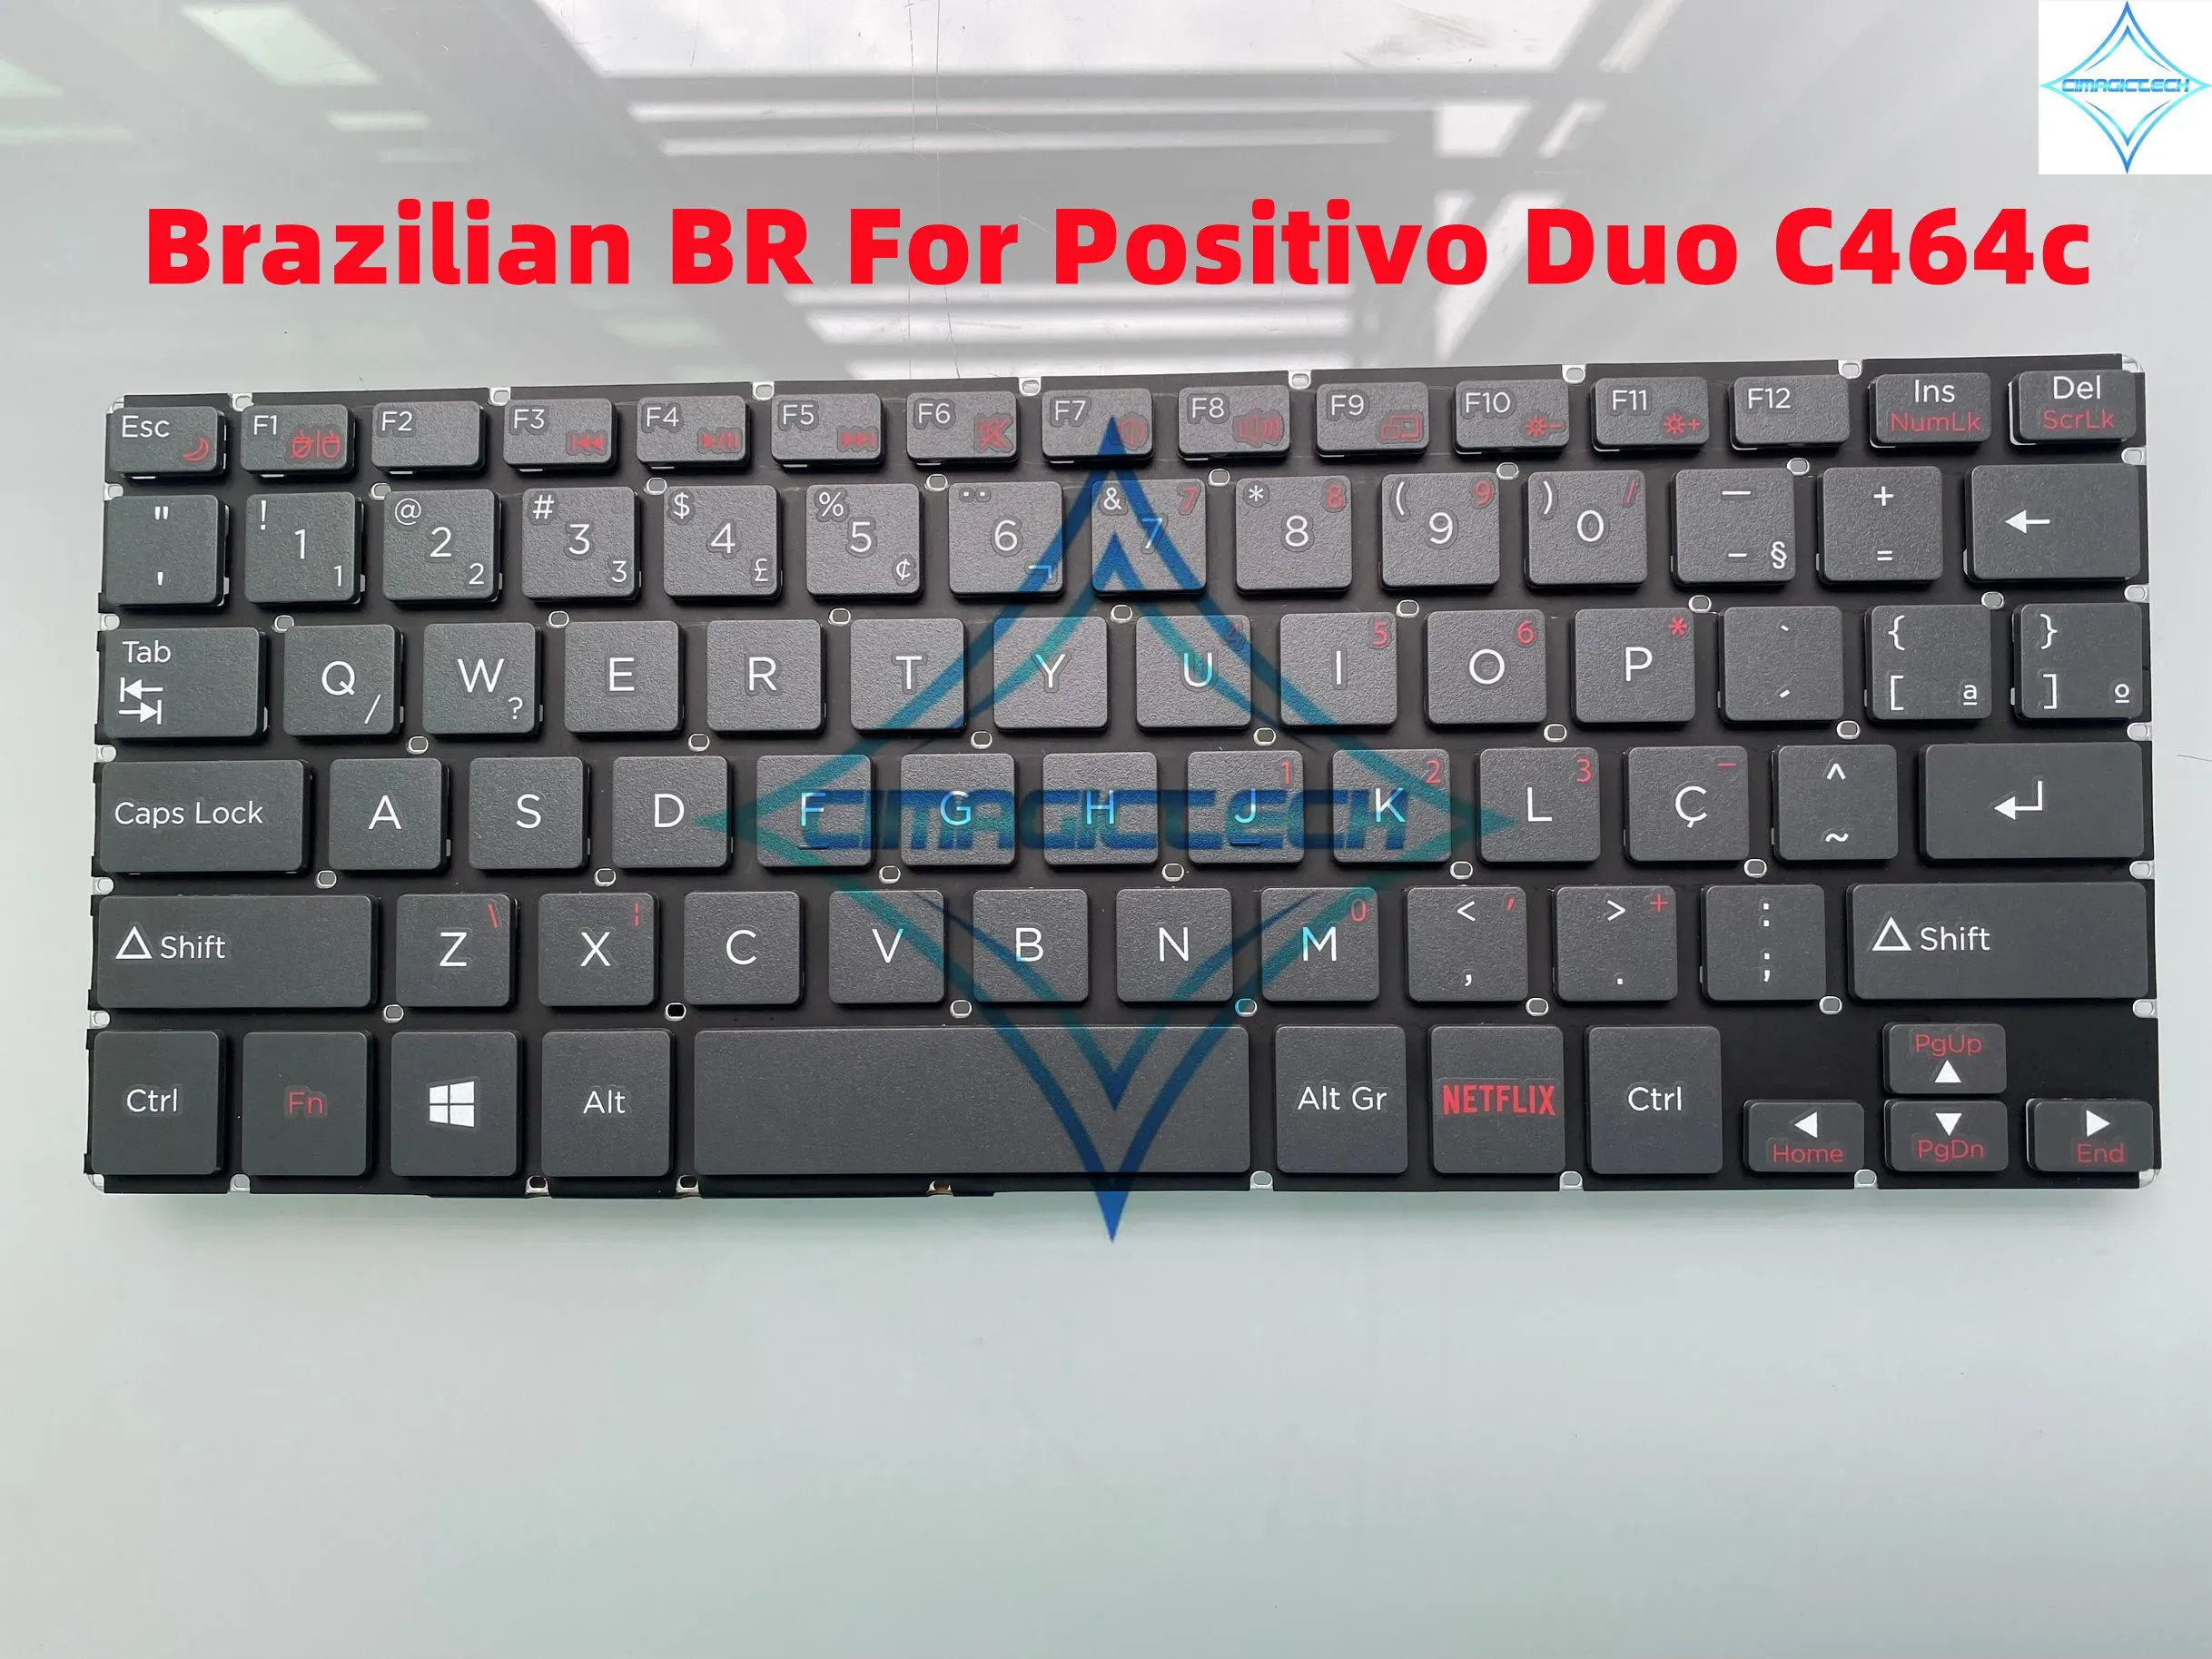 Keyboards New Brazilian BR For Positivo Duo C464c C464 C 464c C464B C4128A C4128B C4128B1 MB2455030 YXT93211 NETFLIX Keyboard Teclado